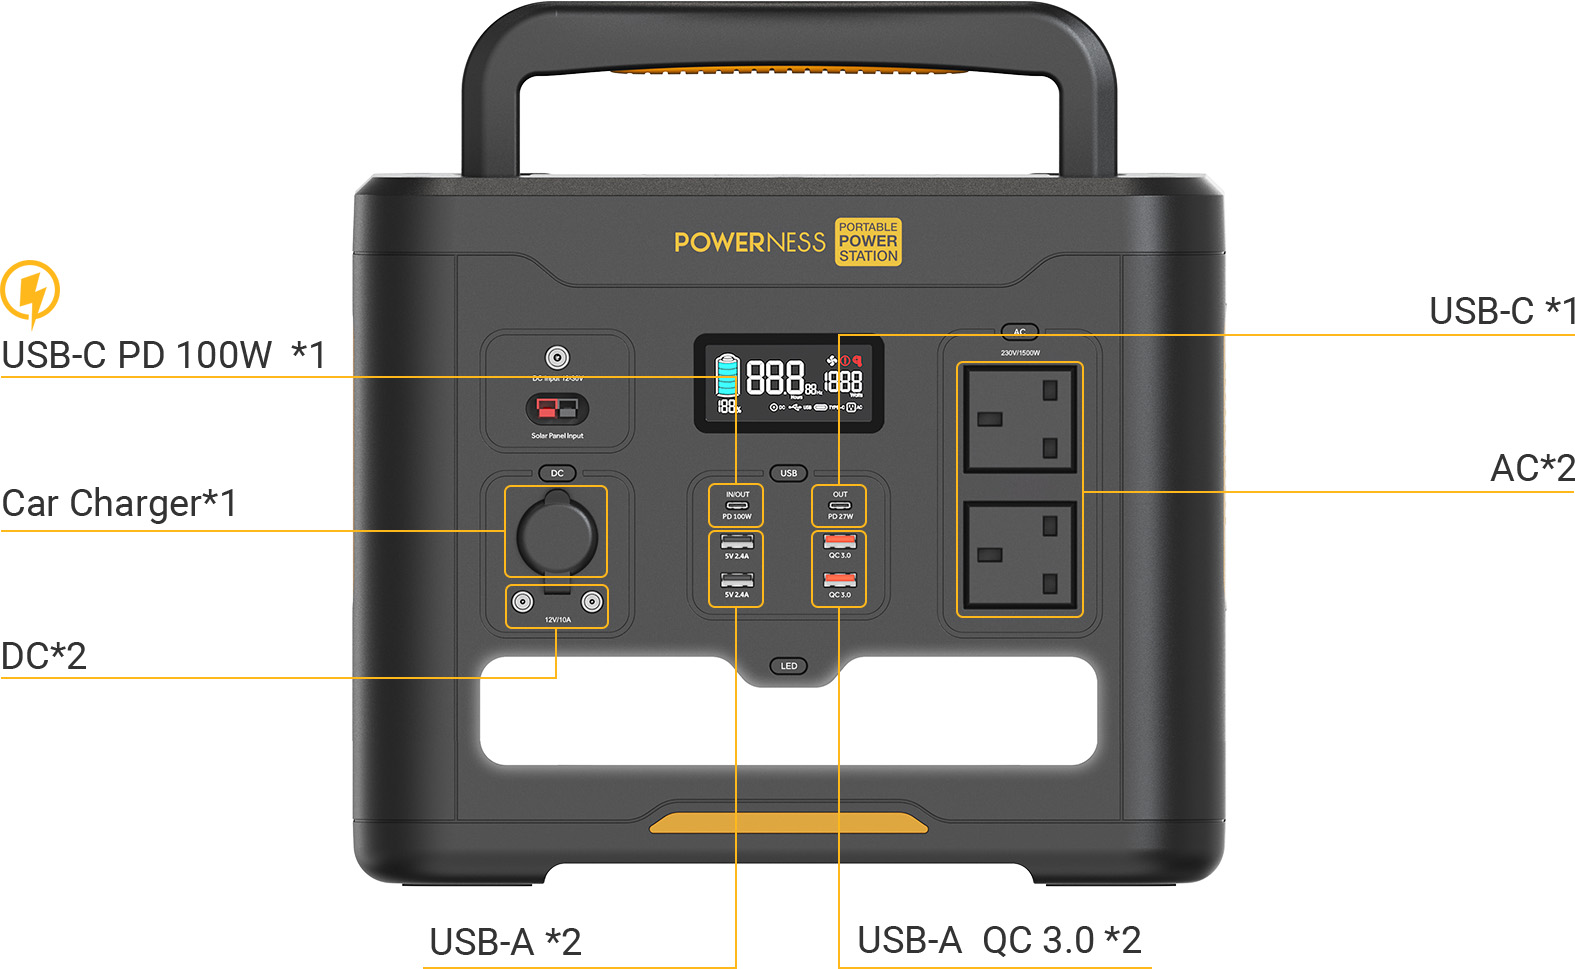 The outputs of Powerness Hiker U1500 Portable Power Station